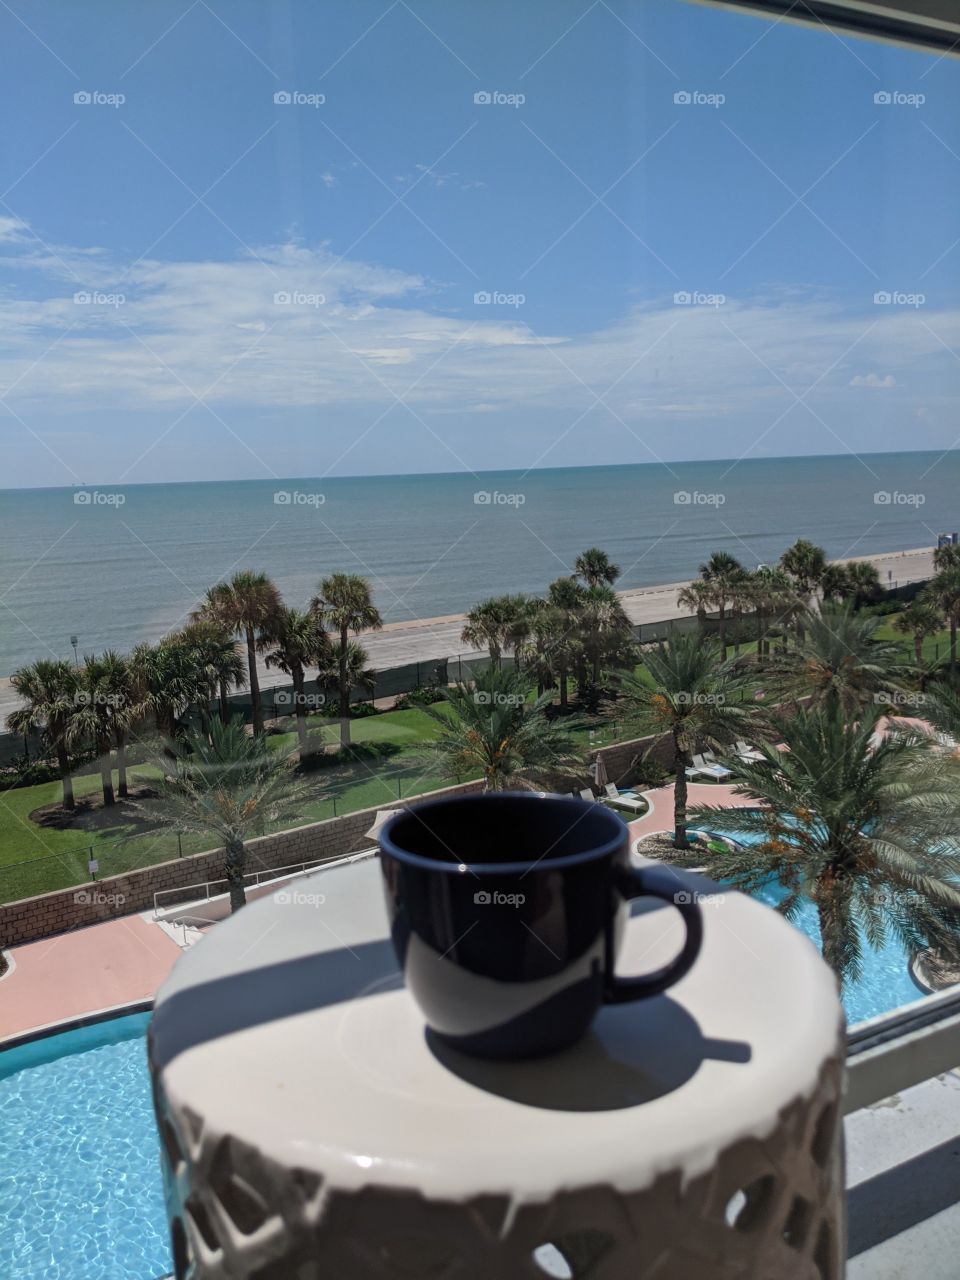 morning coffee with views